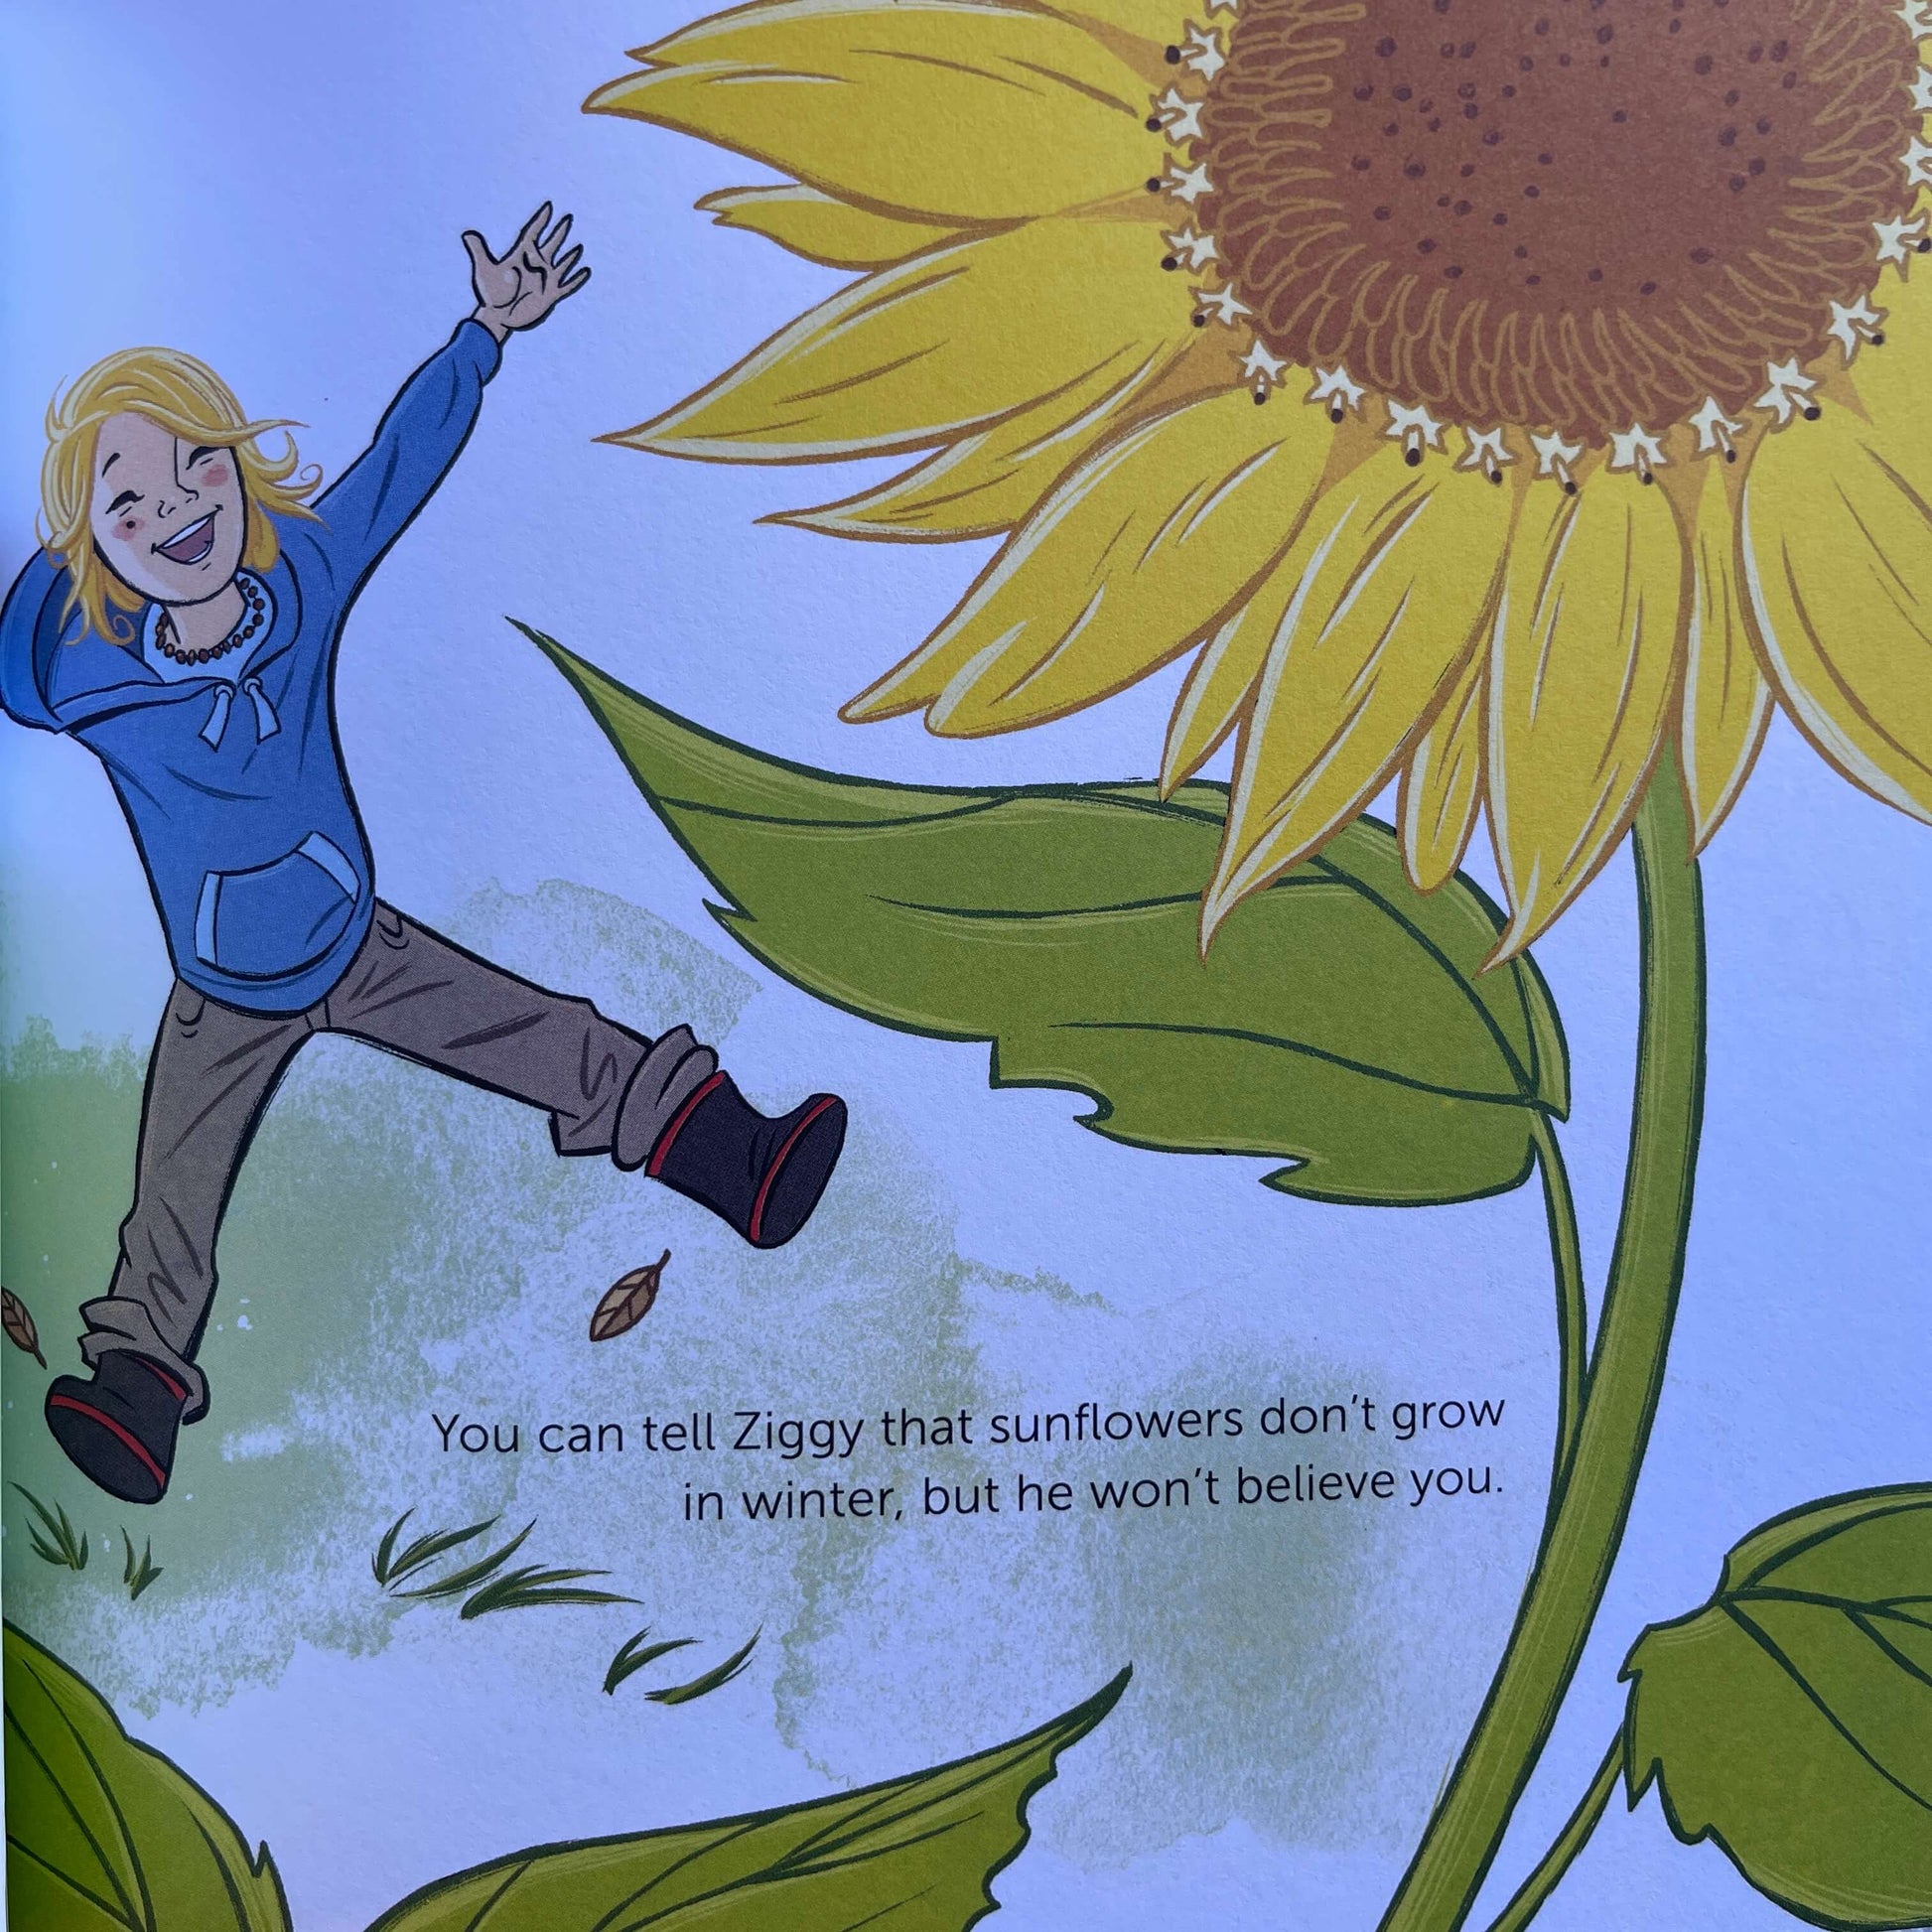 Page from Childrens book Sunflowers Don't Grow in Winter by Emily Holdaway.